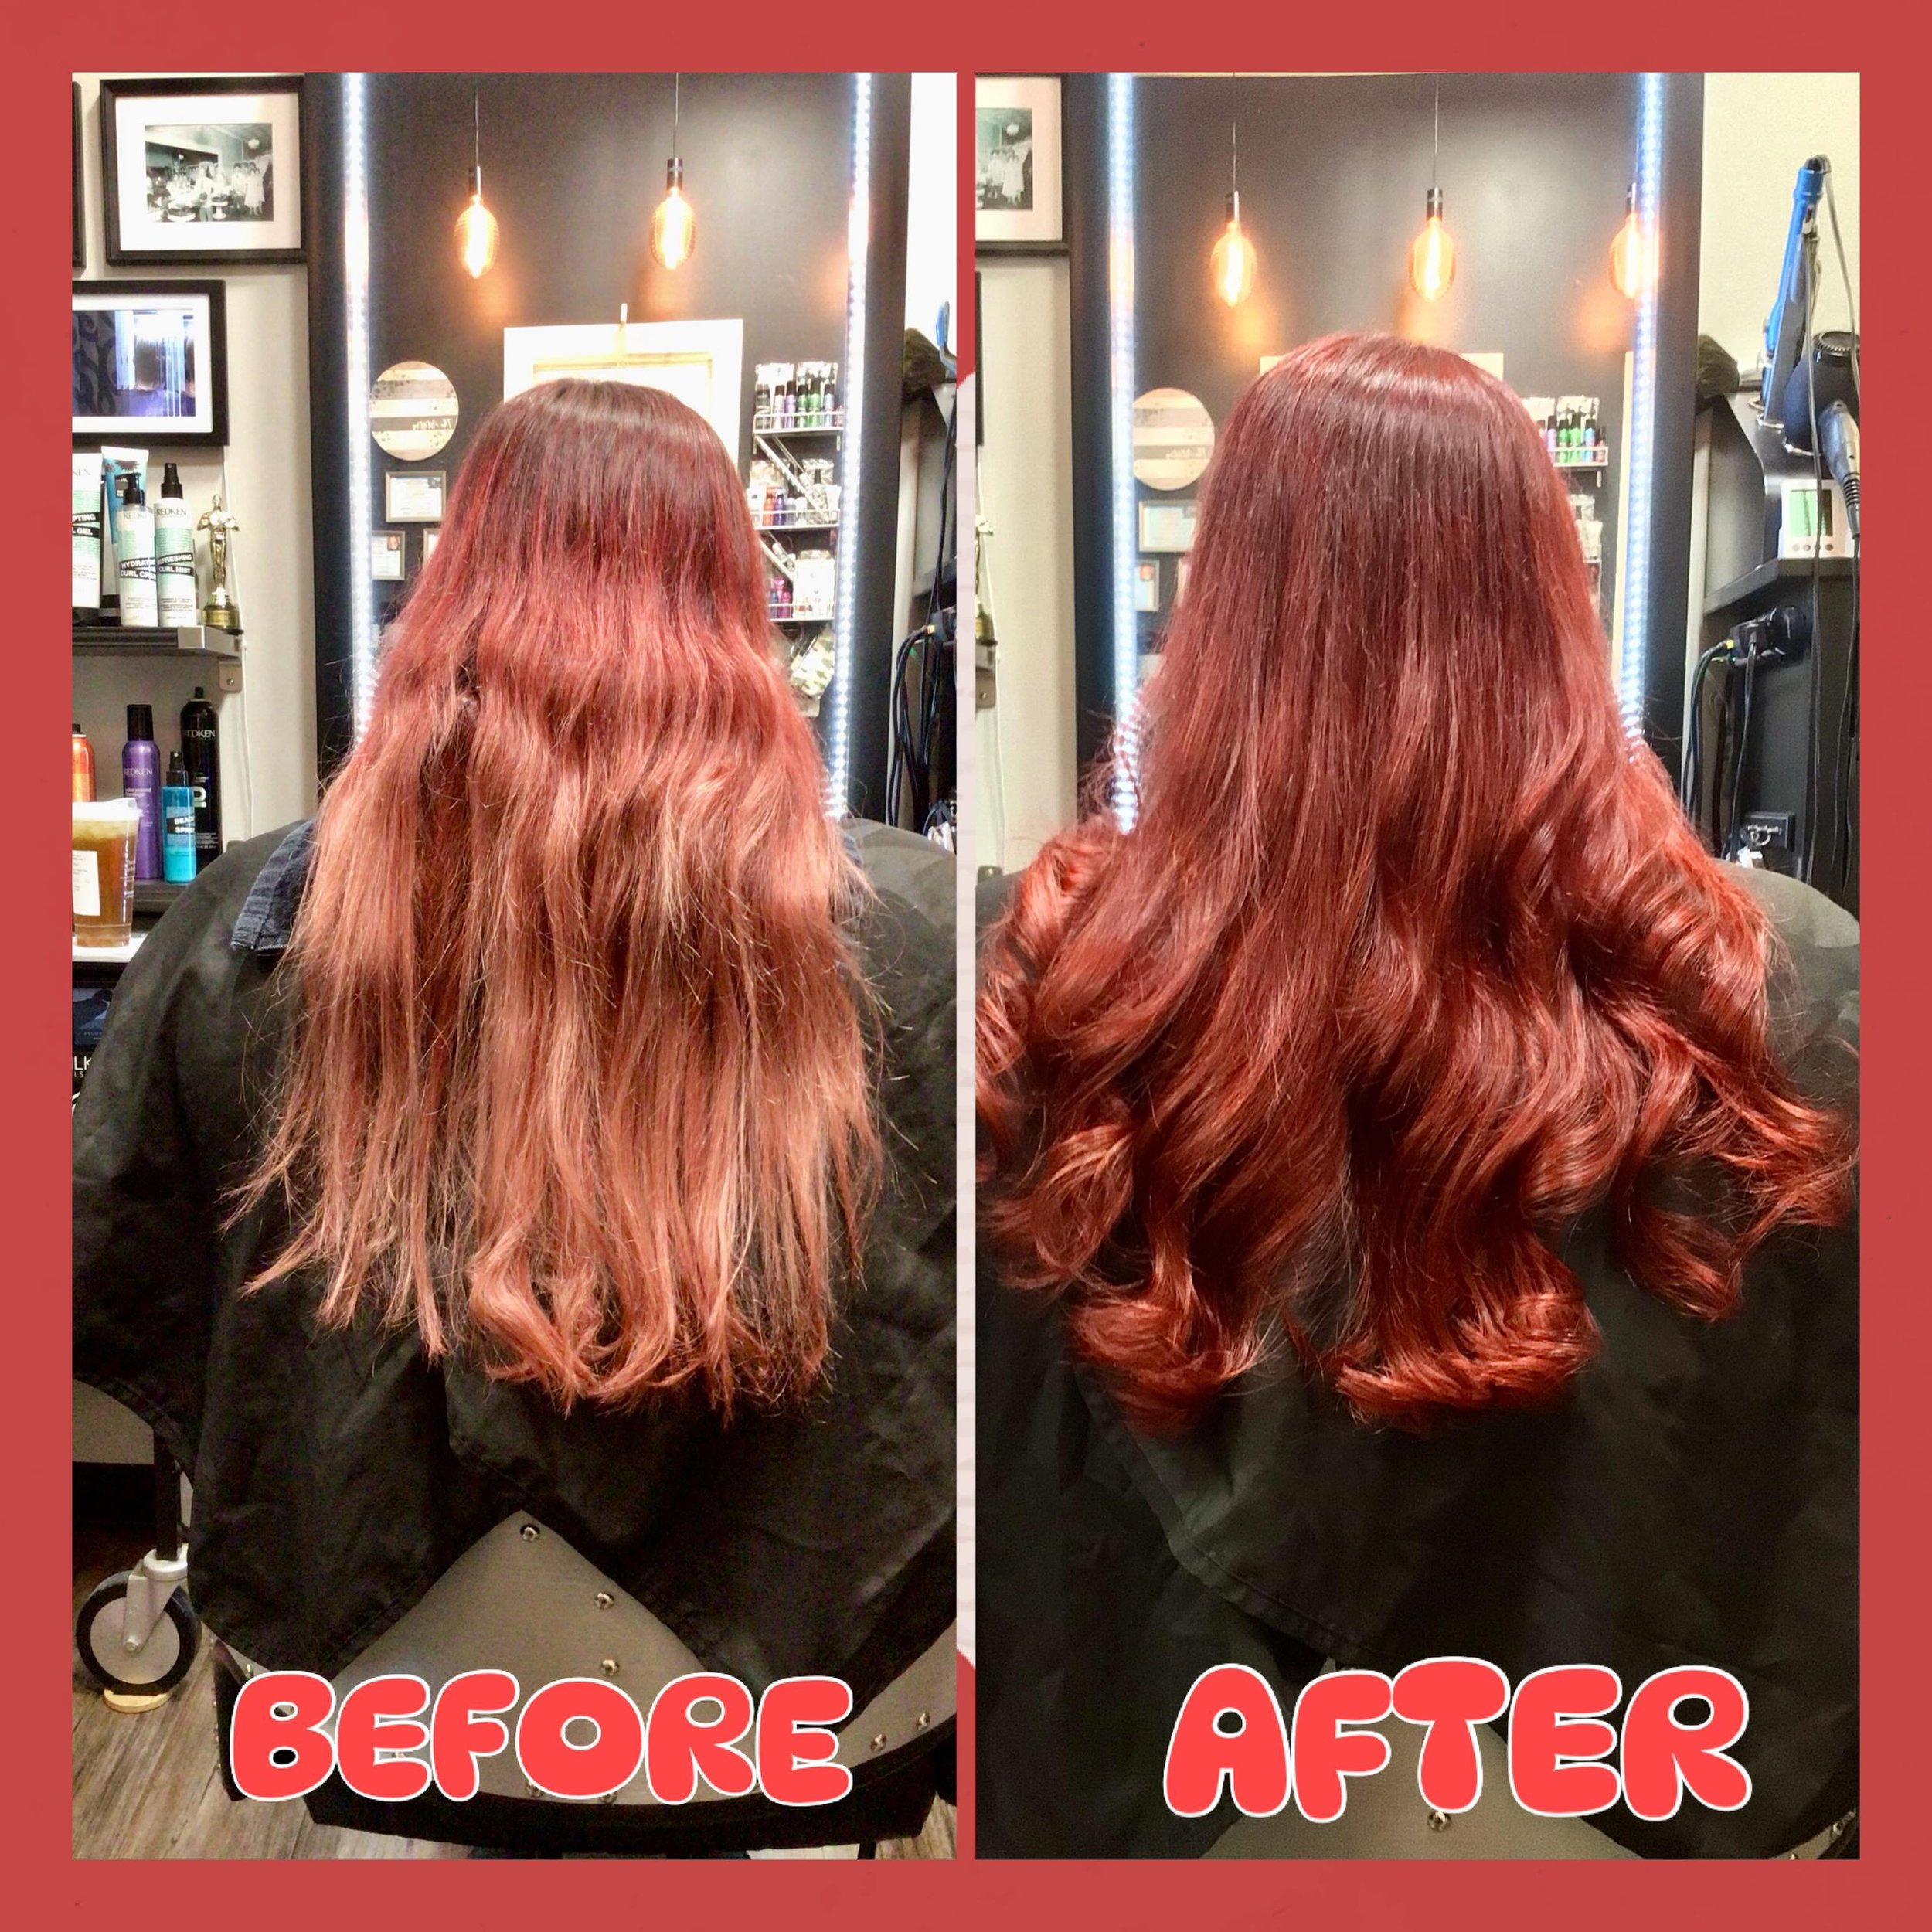 Cindy brightened and refreshed Erica&rsquo;s color 🔥🔥This hair is 🔥🔥LOVE a good color refresh!!! ❤️@theartistryofjustcin #theartistry2020nj #redken #redkenobsessed #redkensalon #ittakesapro #njhairsalon #njhairstylist #njcolorist #licensedtocreat